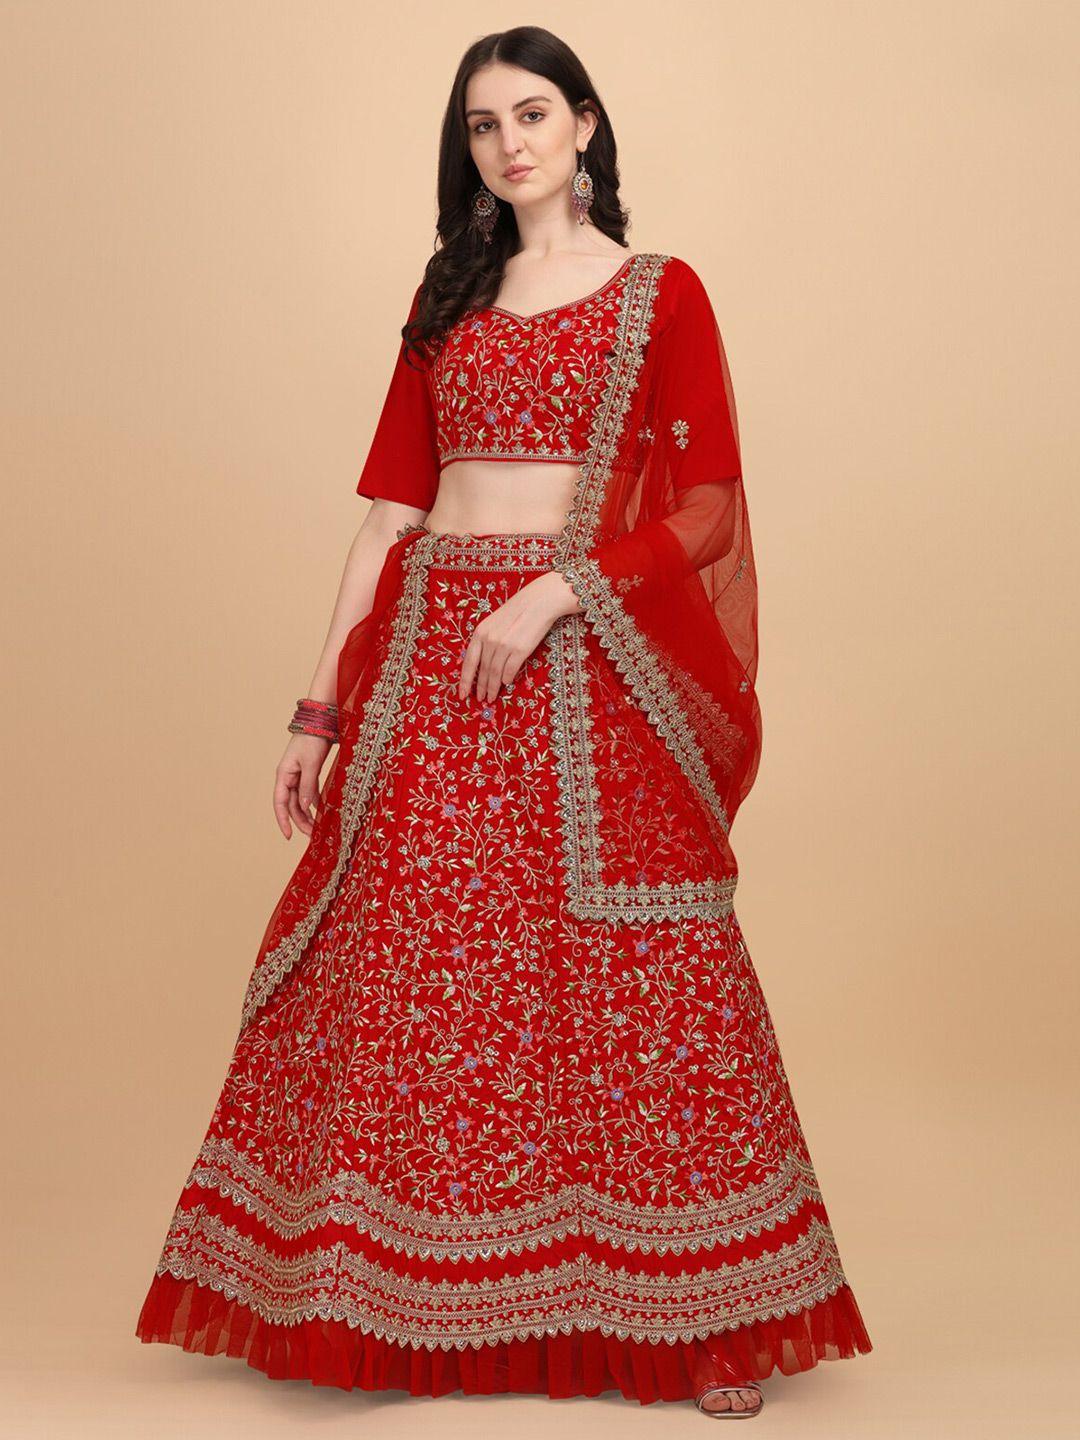 kalini floral embroidered semi-stitched lehenga & unstitched blouse with dupatta